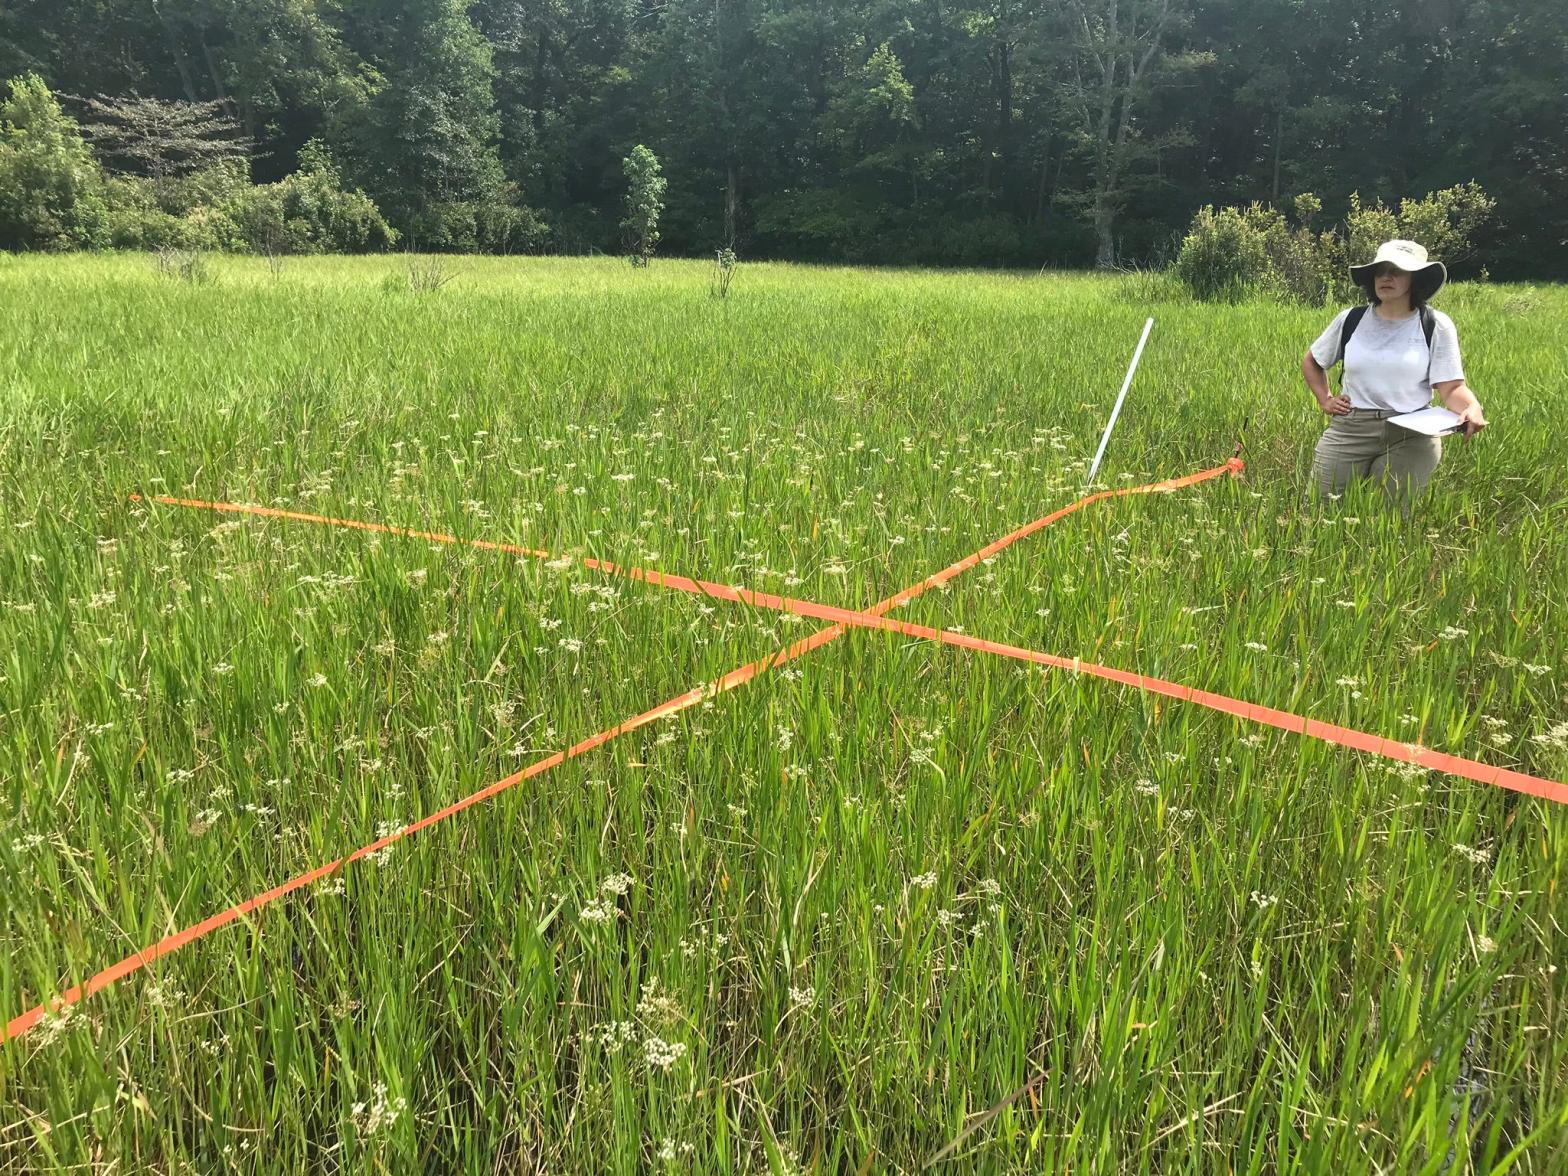 A survey in the field looking at Canby's dropwort (Oxypolis canbyi). (Photo: Chase McLean)